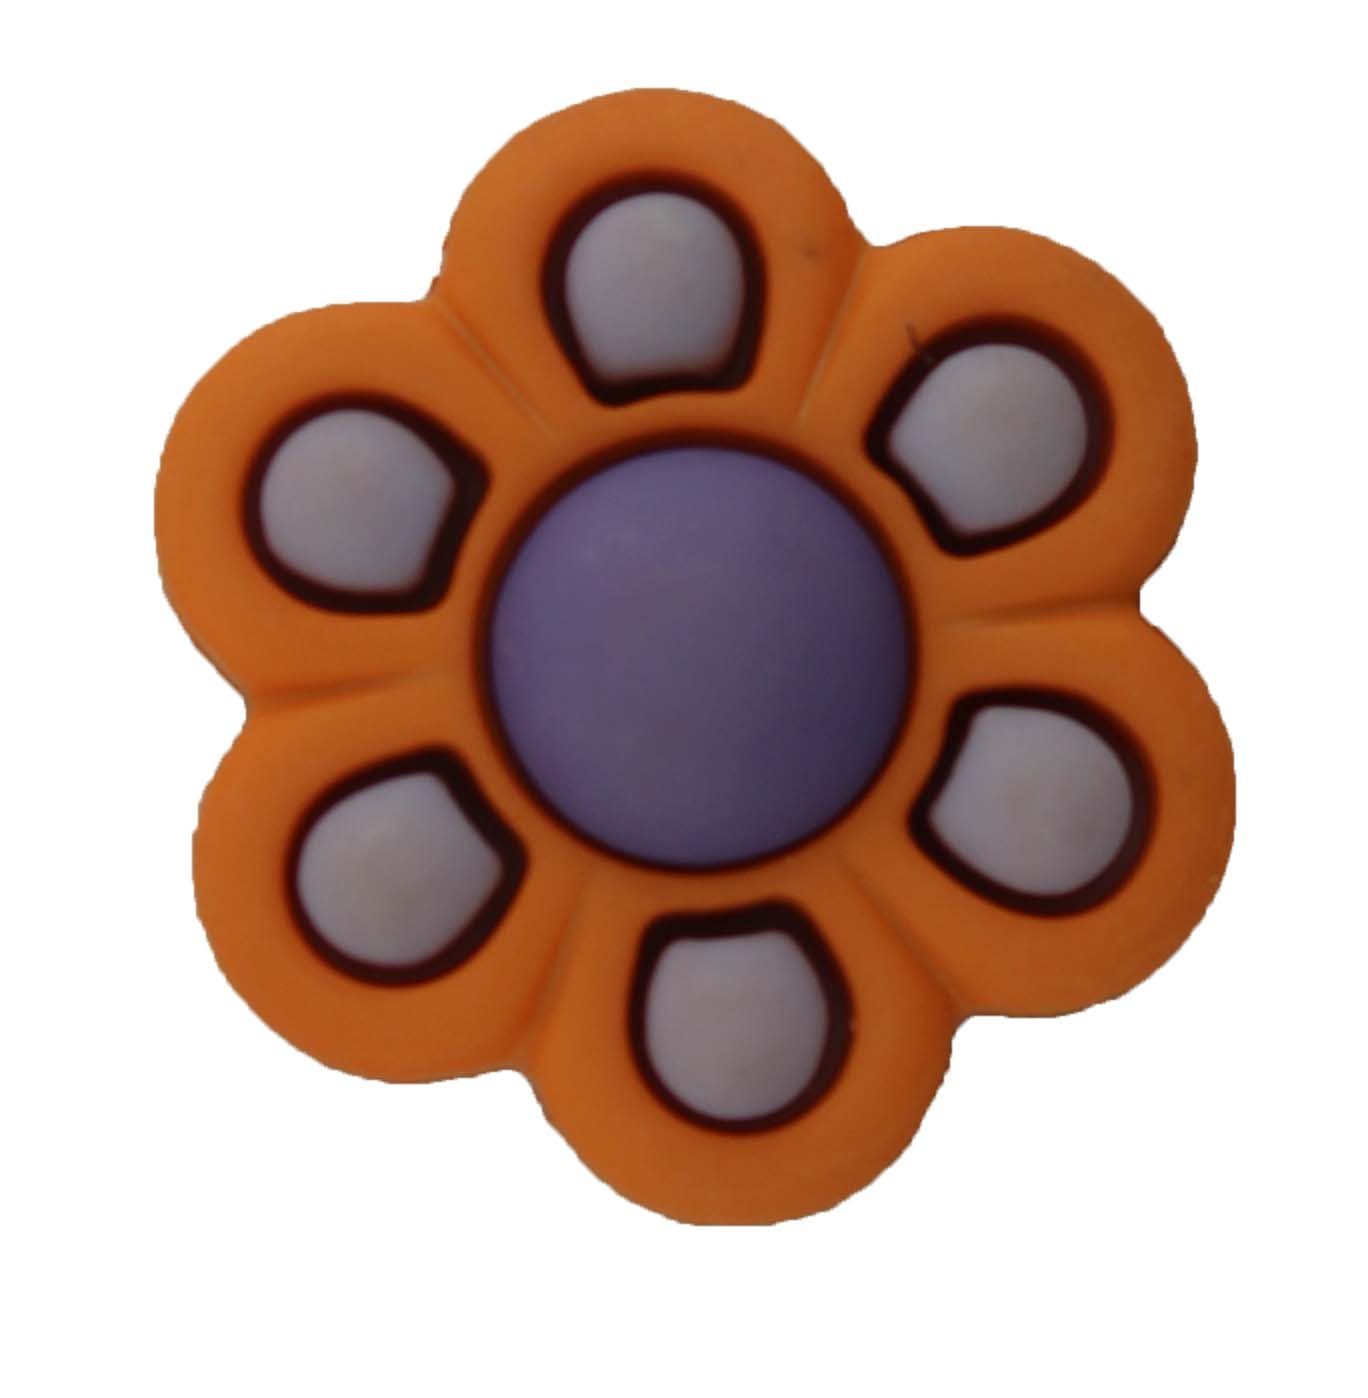 Retro Flower - B376 - Buttons Galore and More